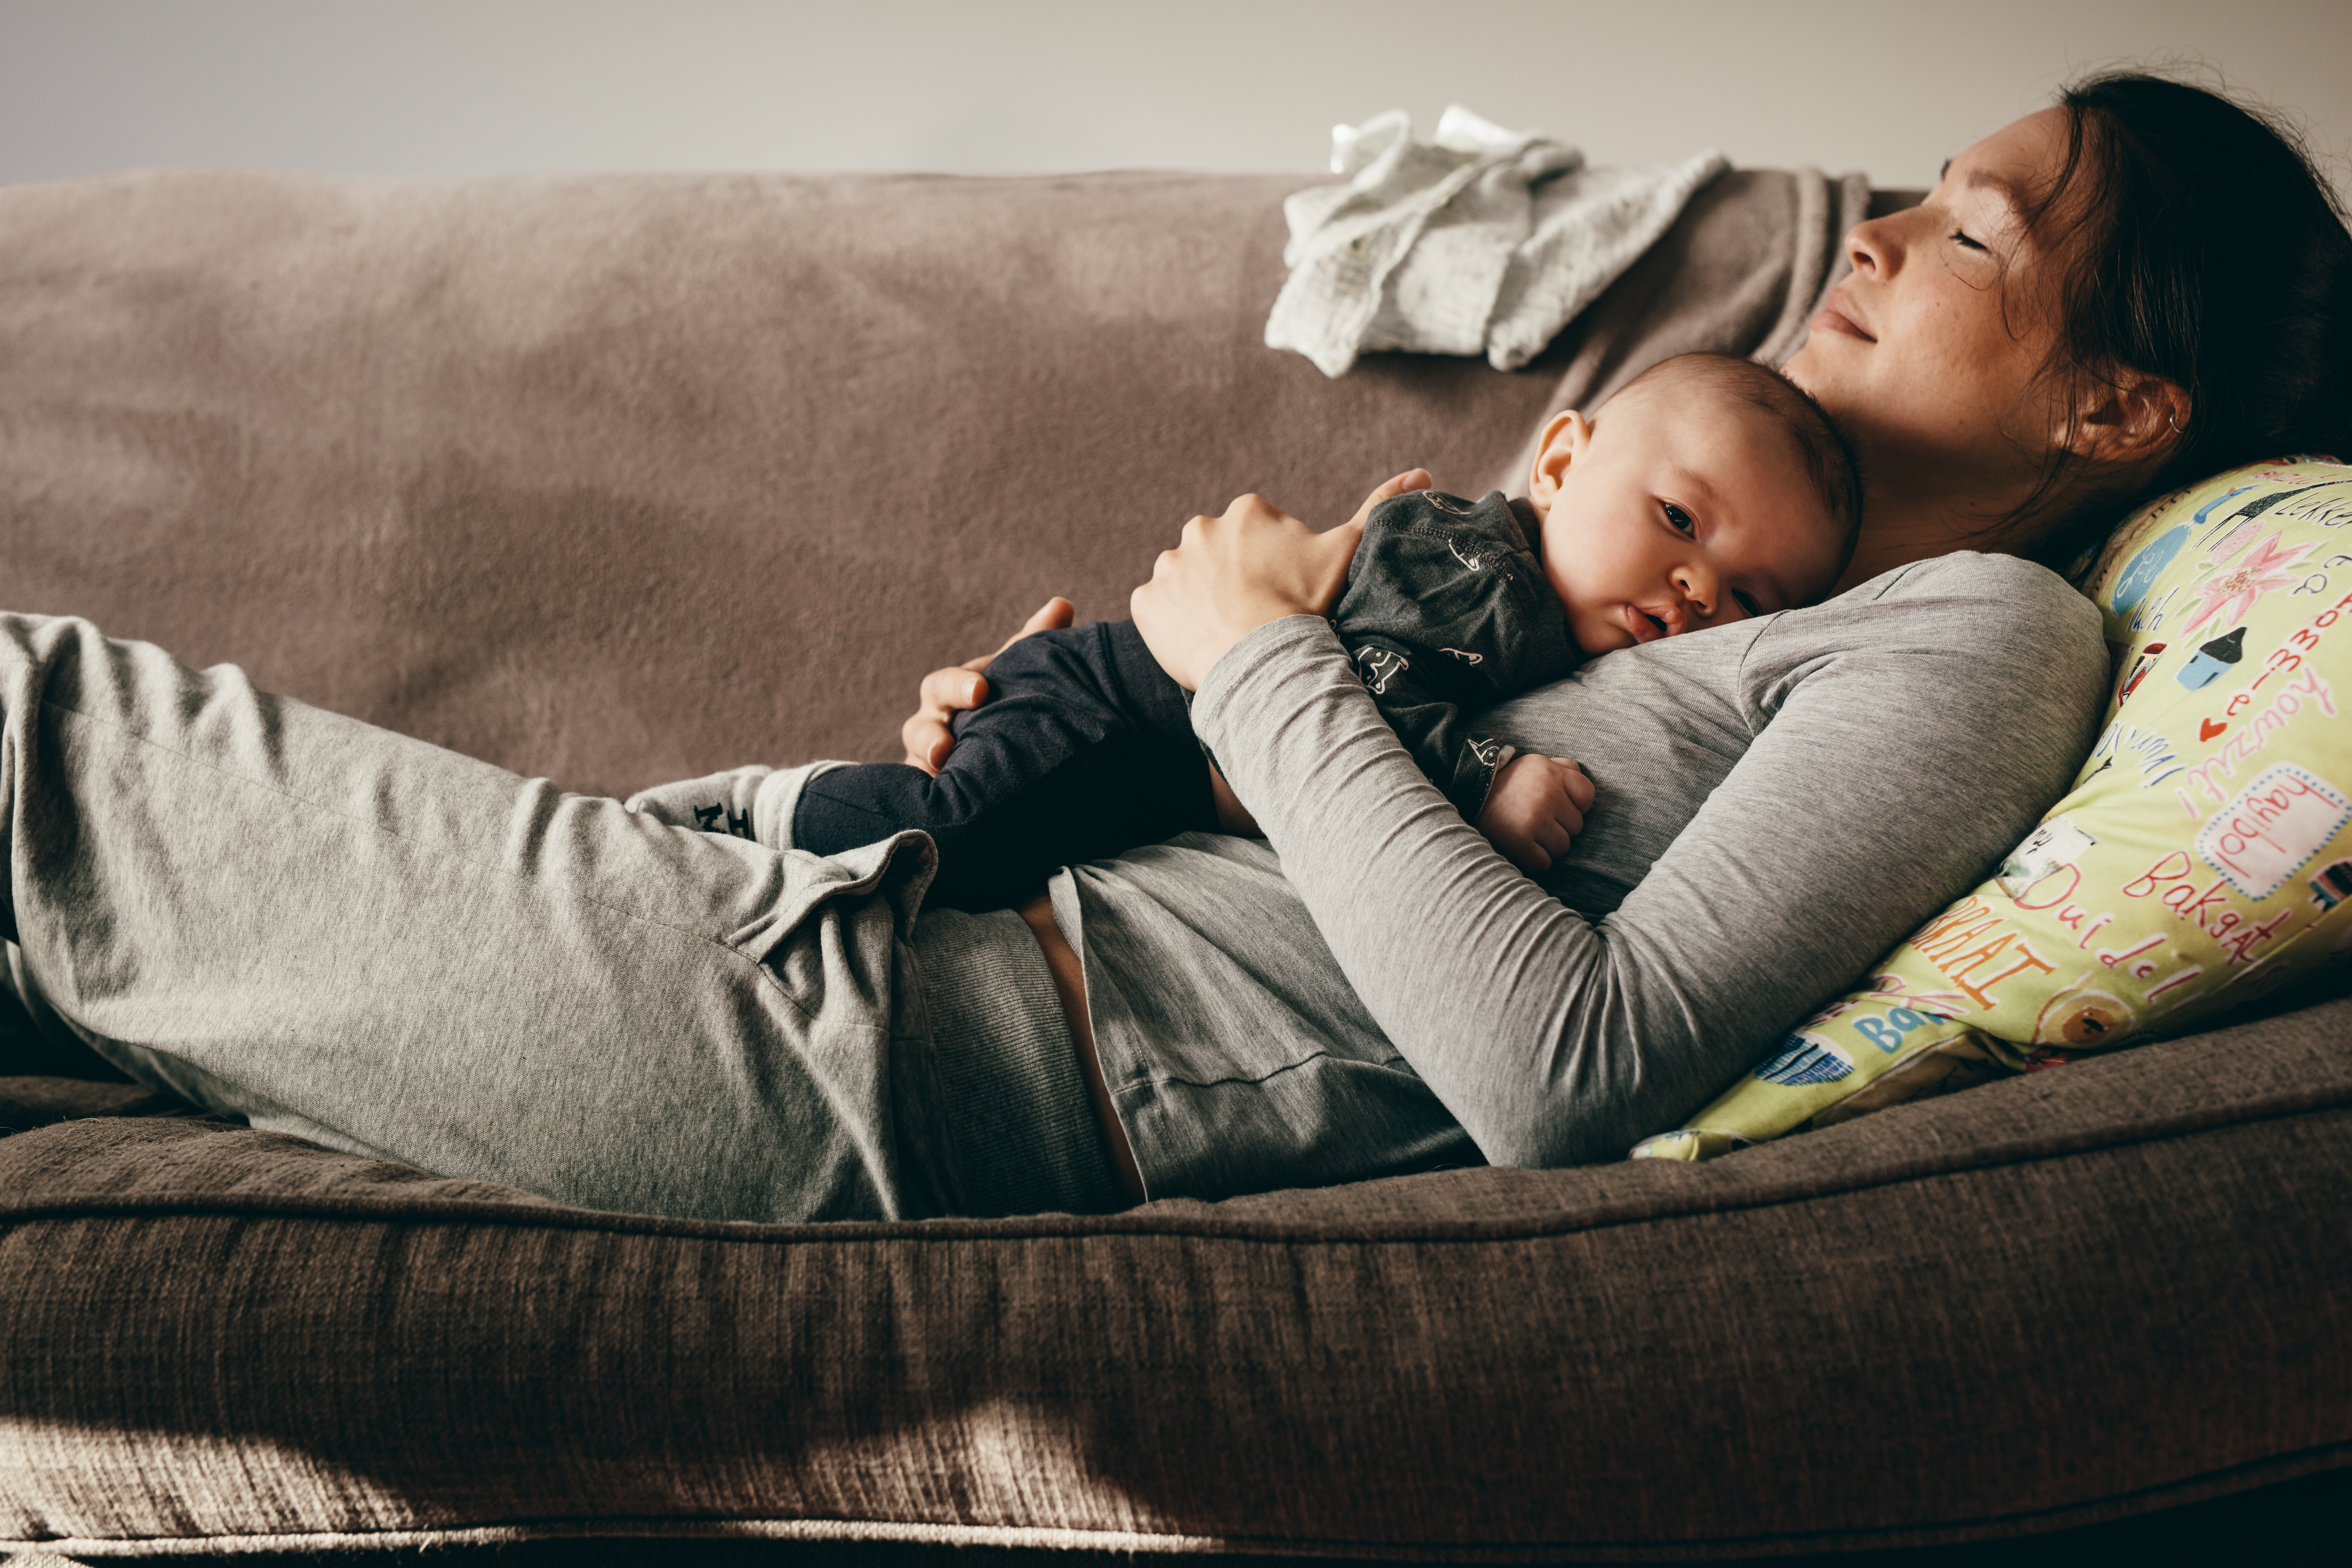 A mother laying on the couch while holding a baby | Source: Shutterstock